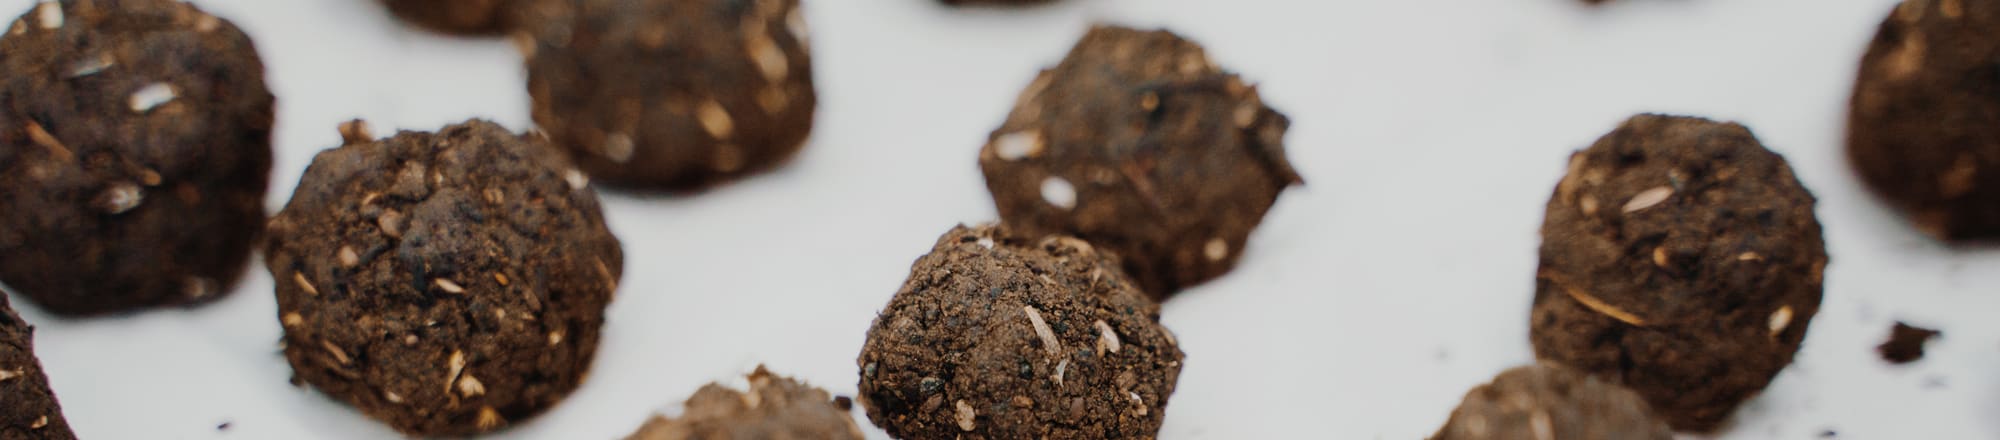 Promising - seed balls for love to flourish